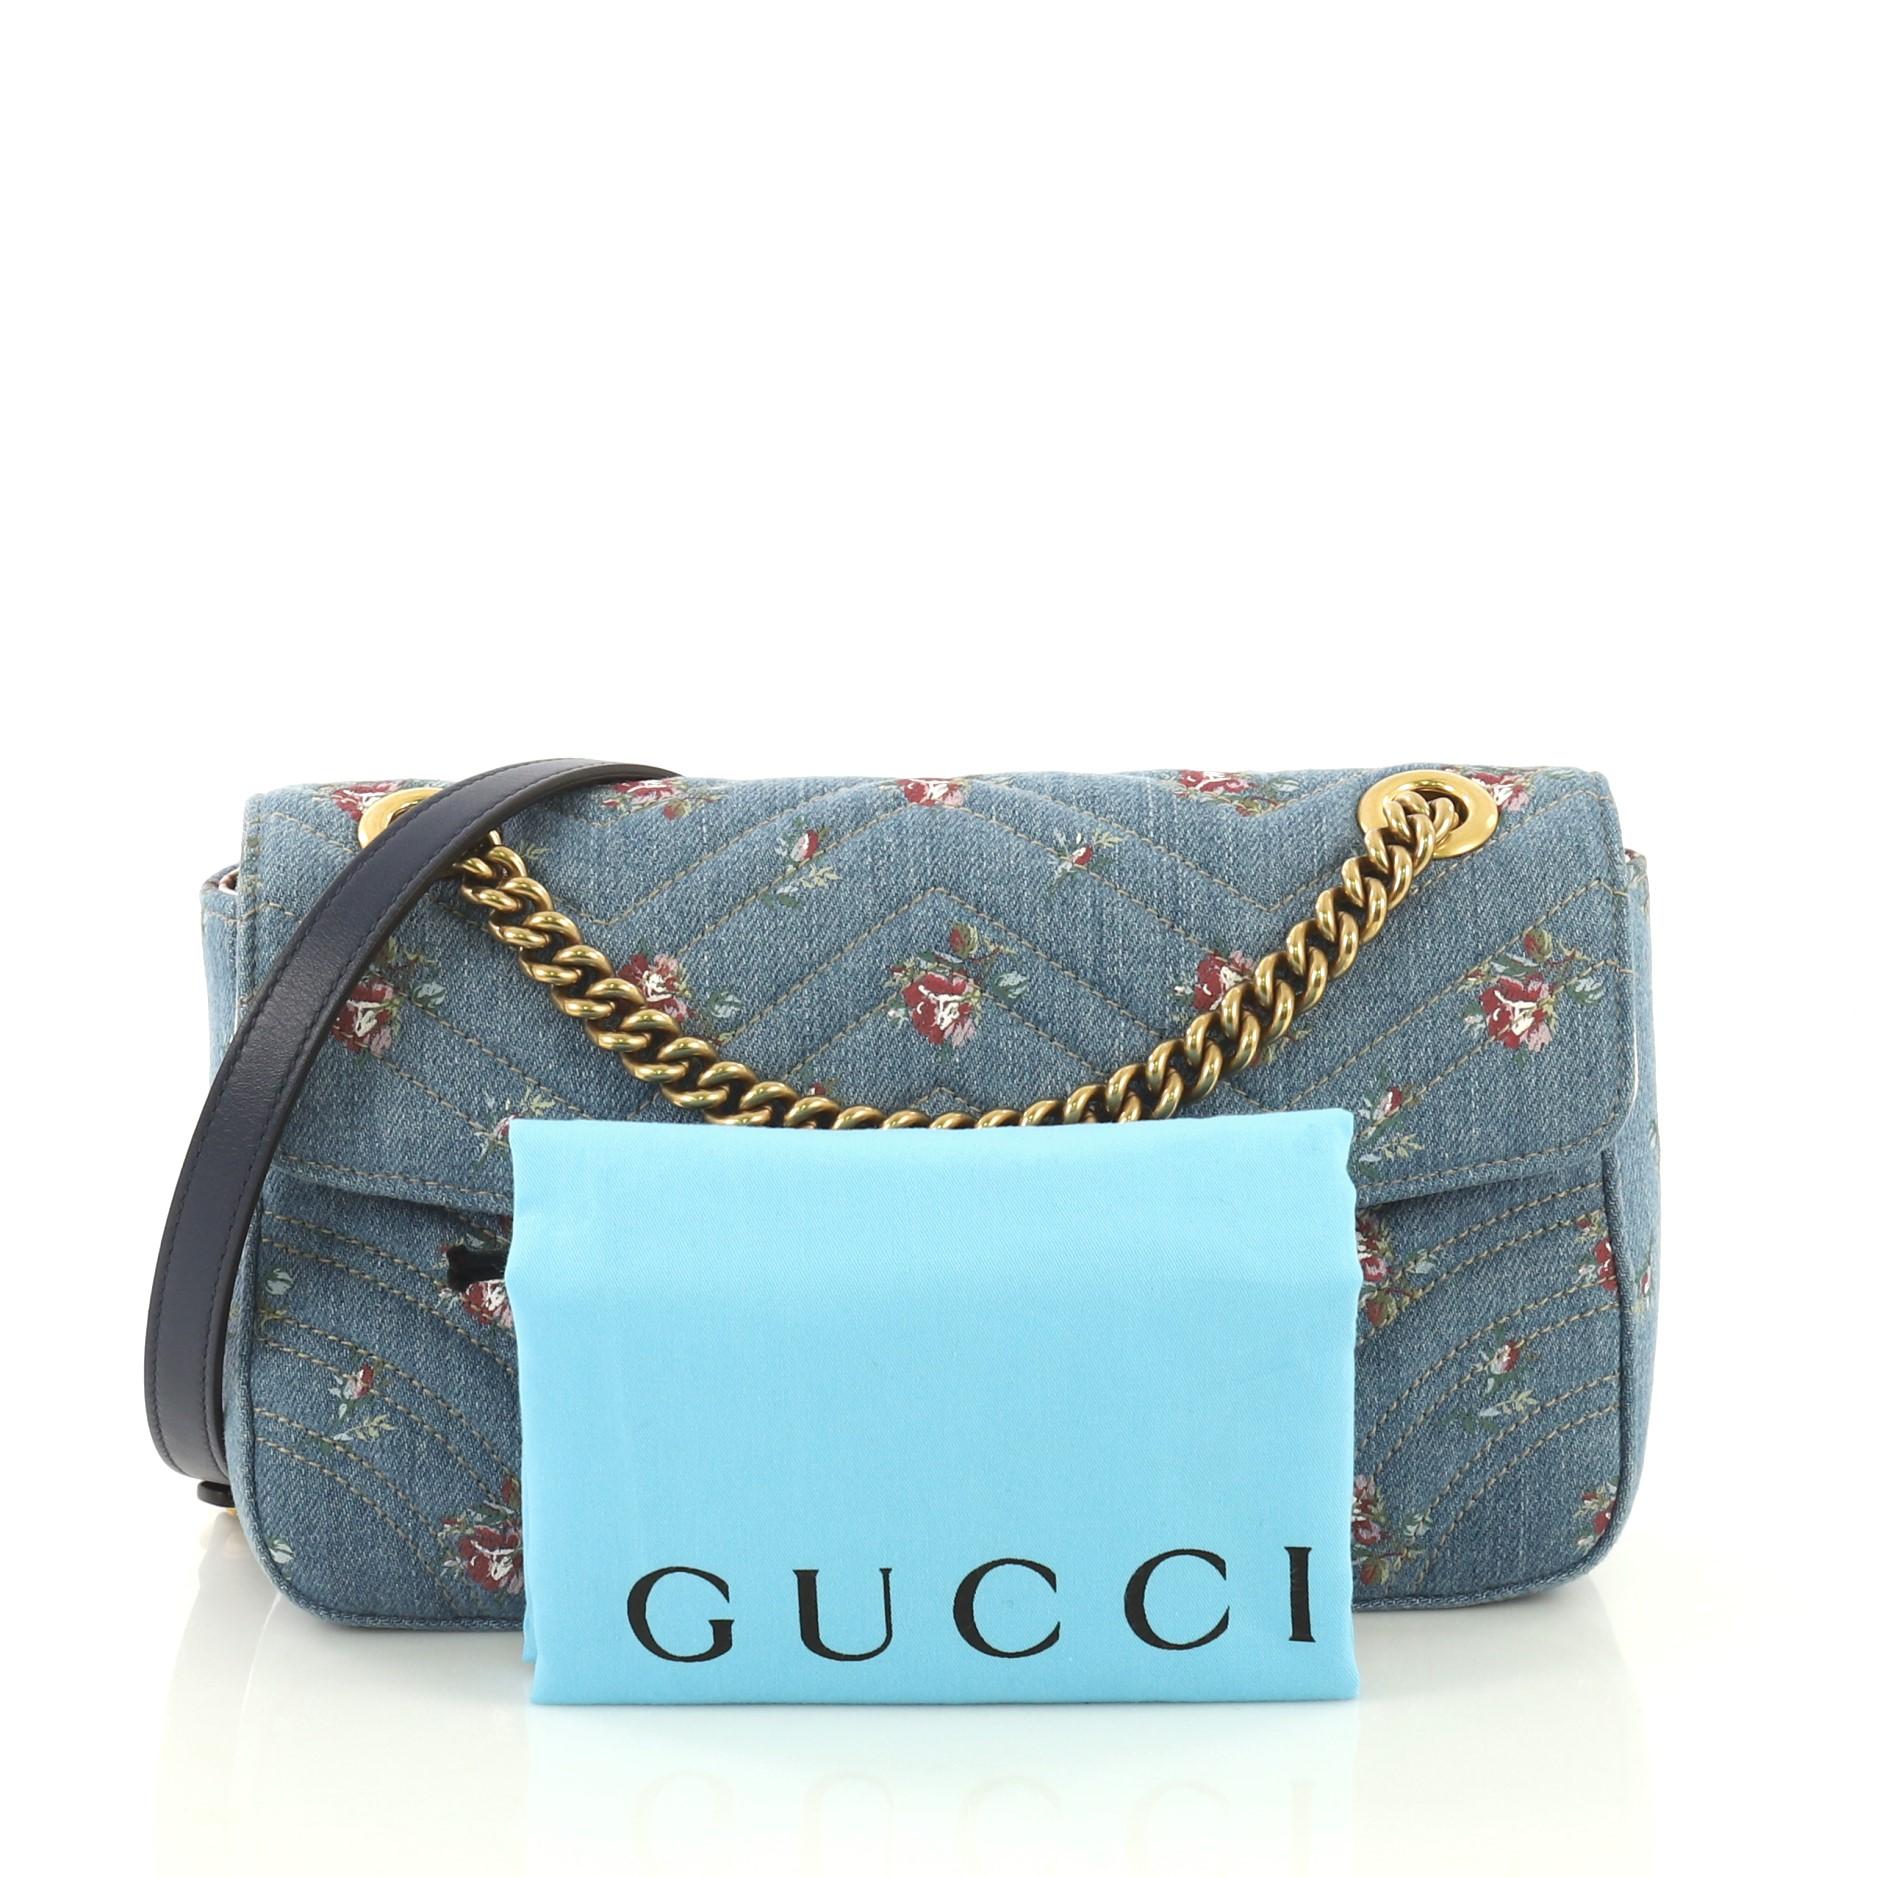 This Gucci GG Marmont Flap Bag Printed Matelasse Denim Small, crafted from blue printed matelasse denim, features a sliding chain strap with shoulder pad, flap top with interlocking GG logo, and gold-tone hardware. Its spring closure opens to a pink